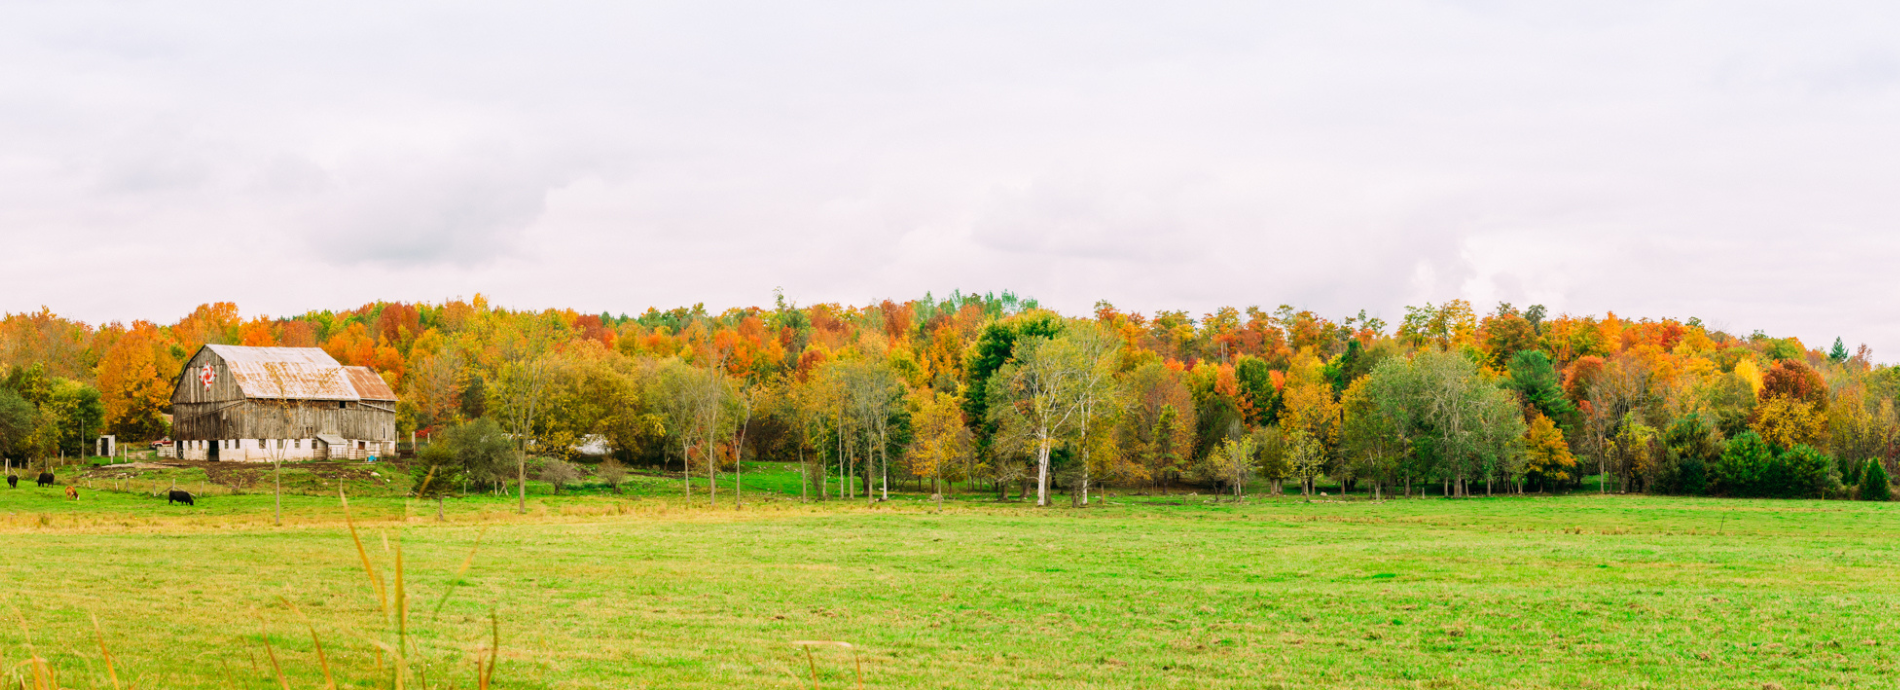 a field and trees in fall colour